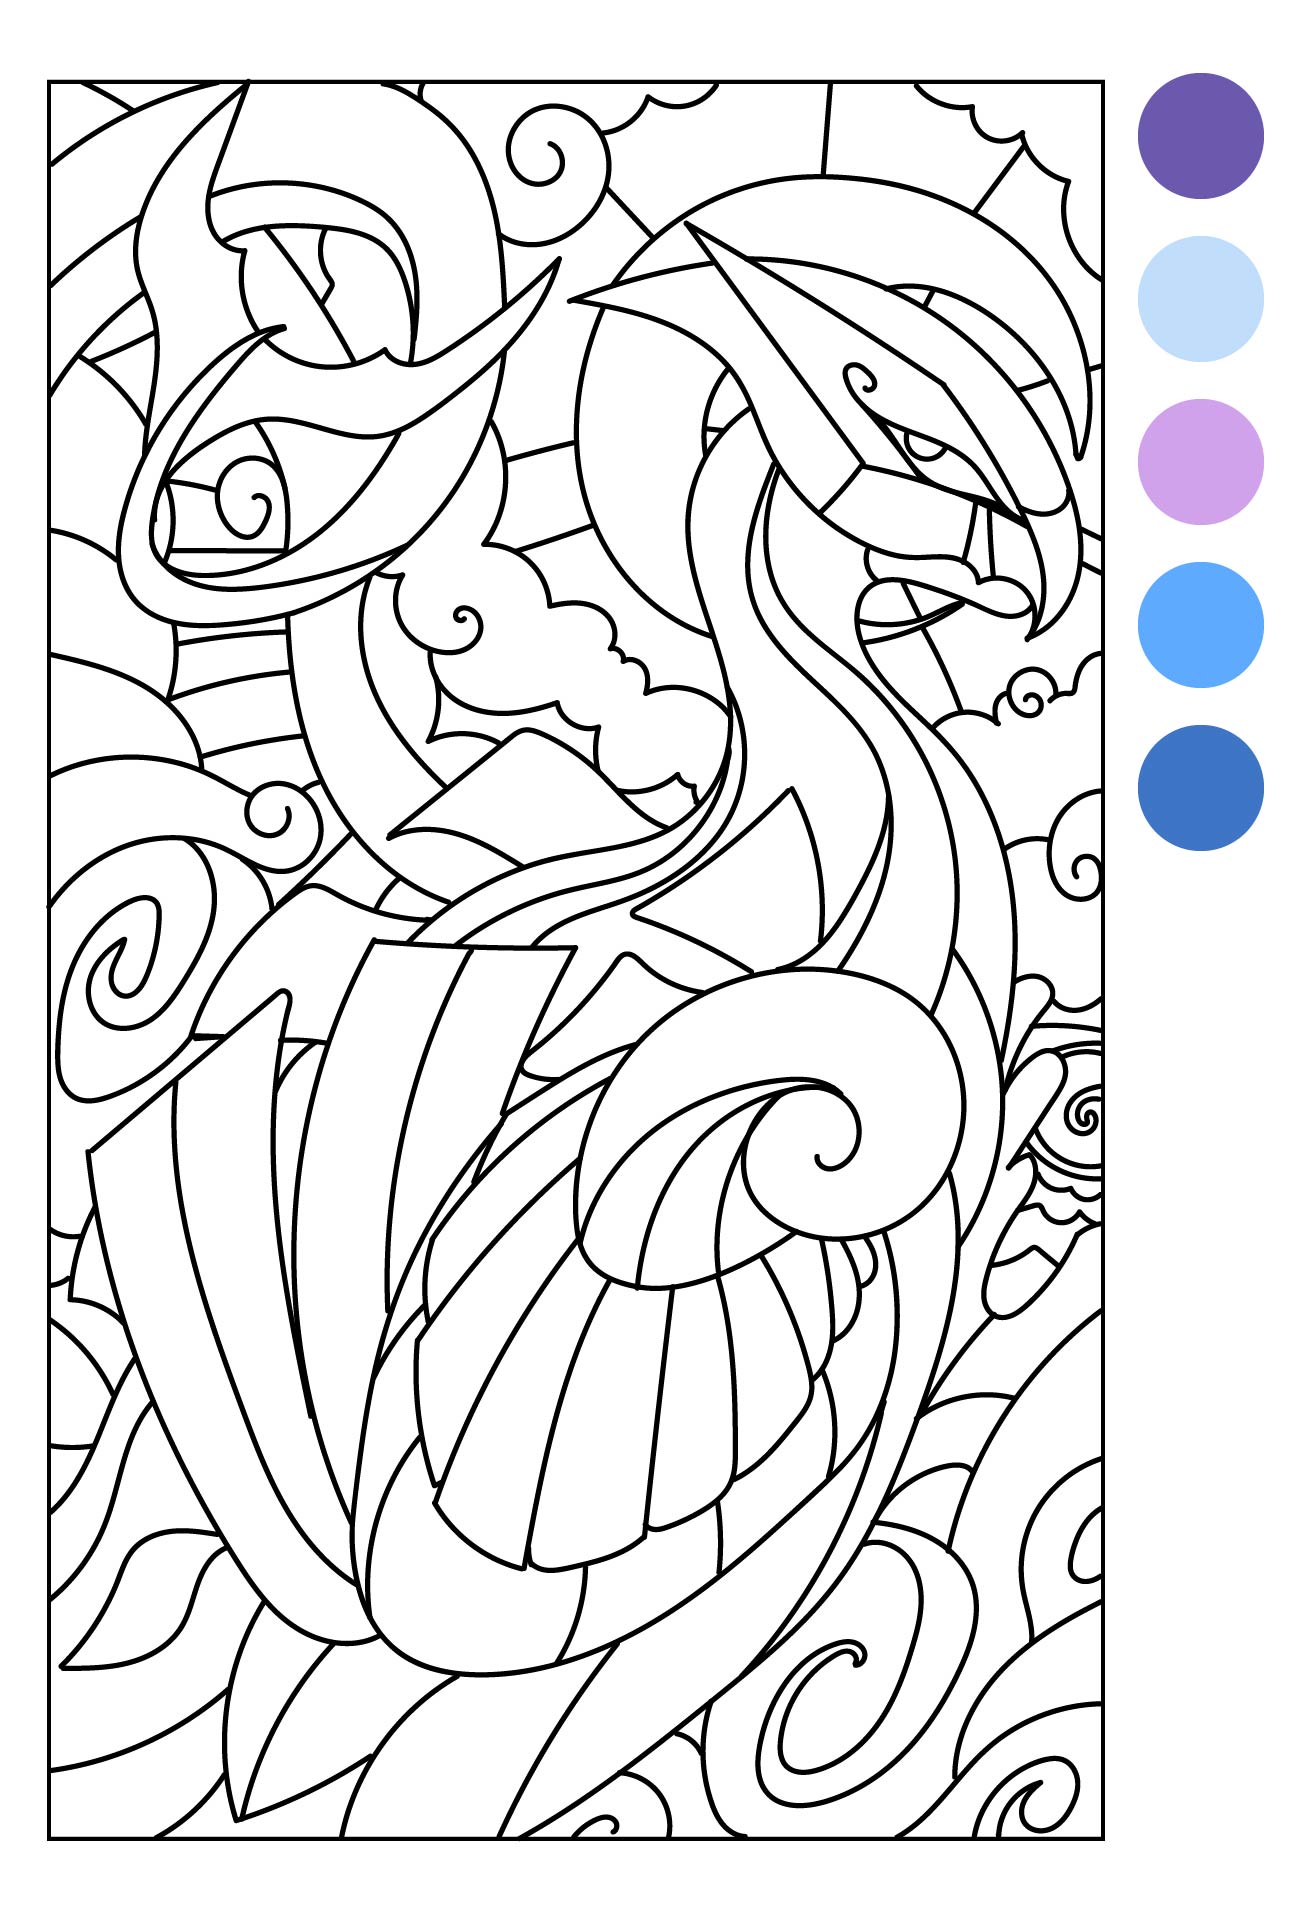 printable mosaic coloring pages